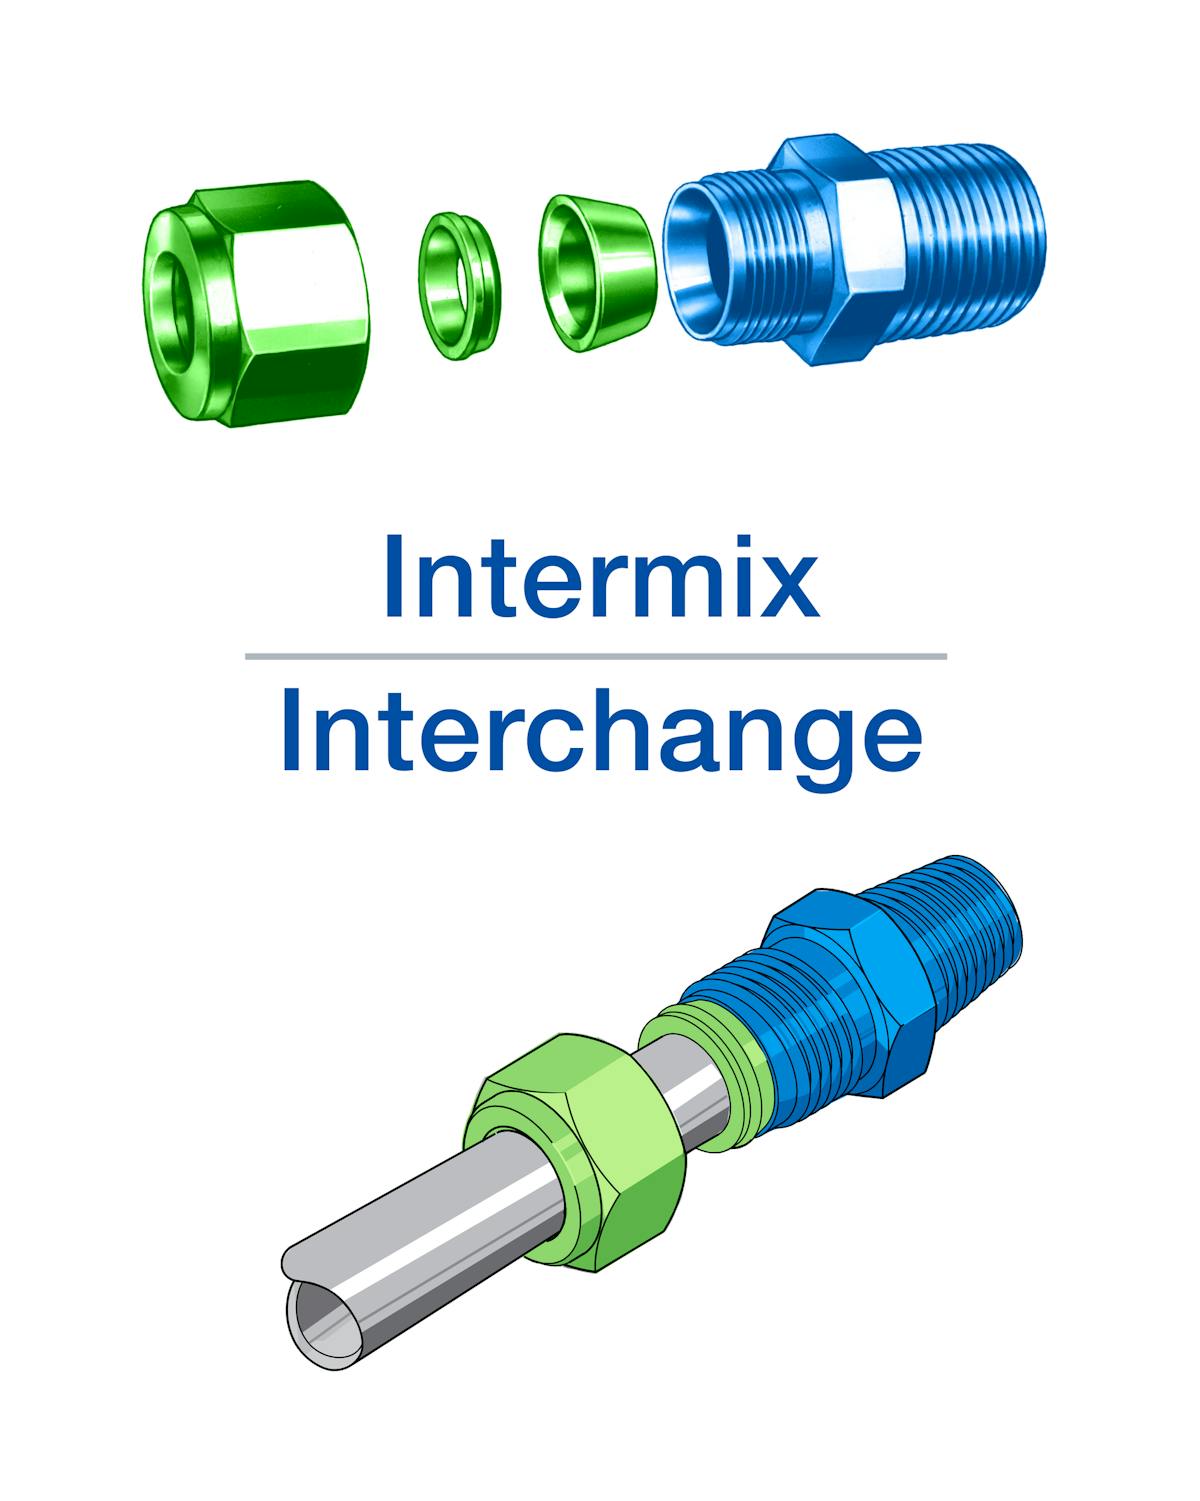 2. Once intermixing or interchanging occurs, the resulting tube fitting no longer meets the design specifications of either component&rsquo;s manufacturer. This could lead to significant problems and could even void the tube fitting&rsquo;s warranty.